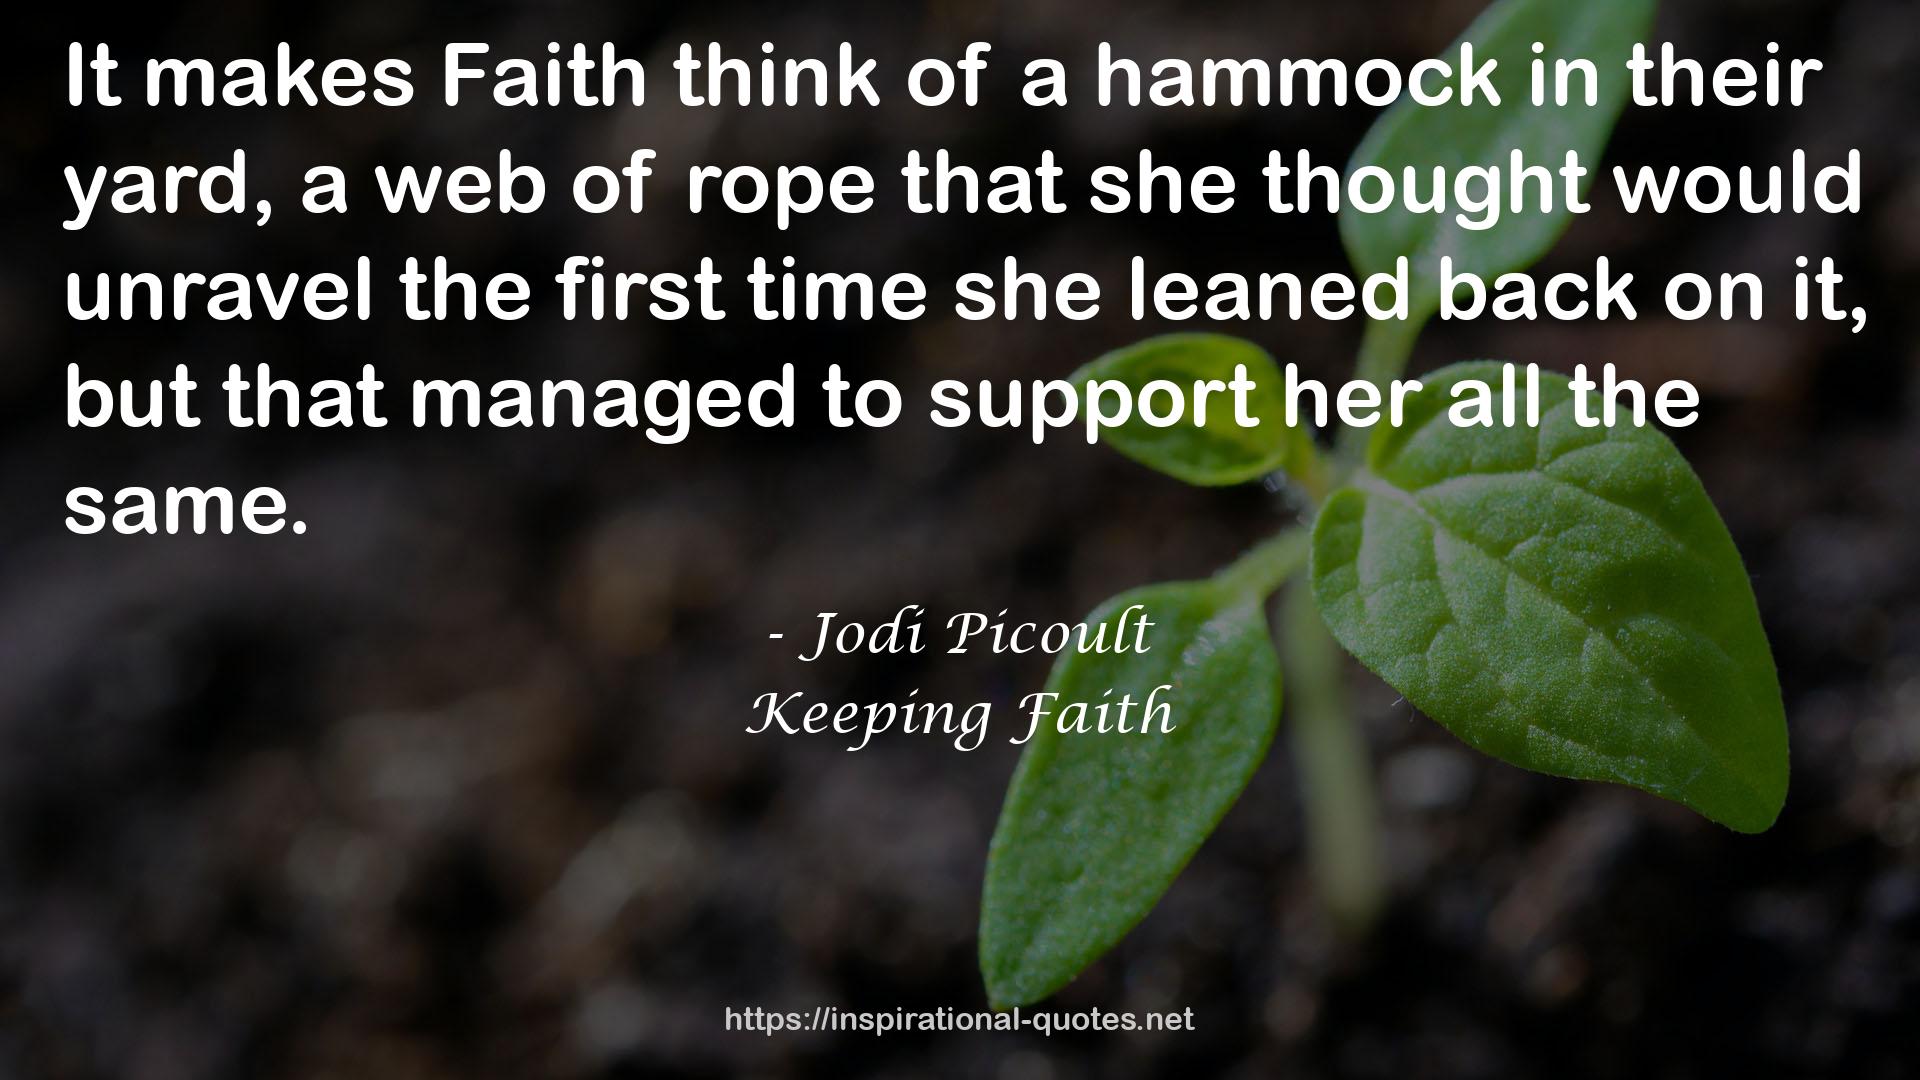 Keeping Faith QUOTES